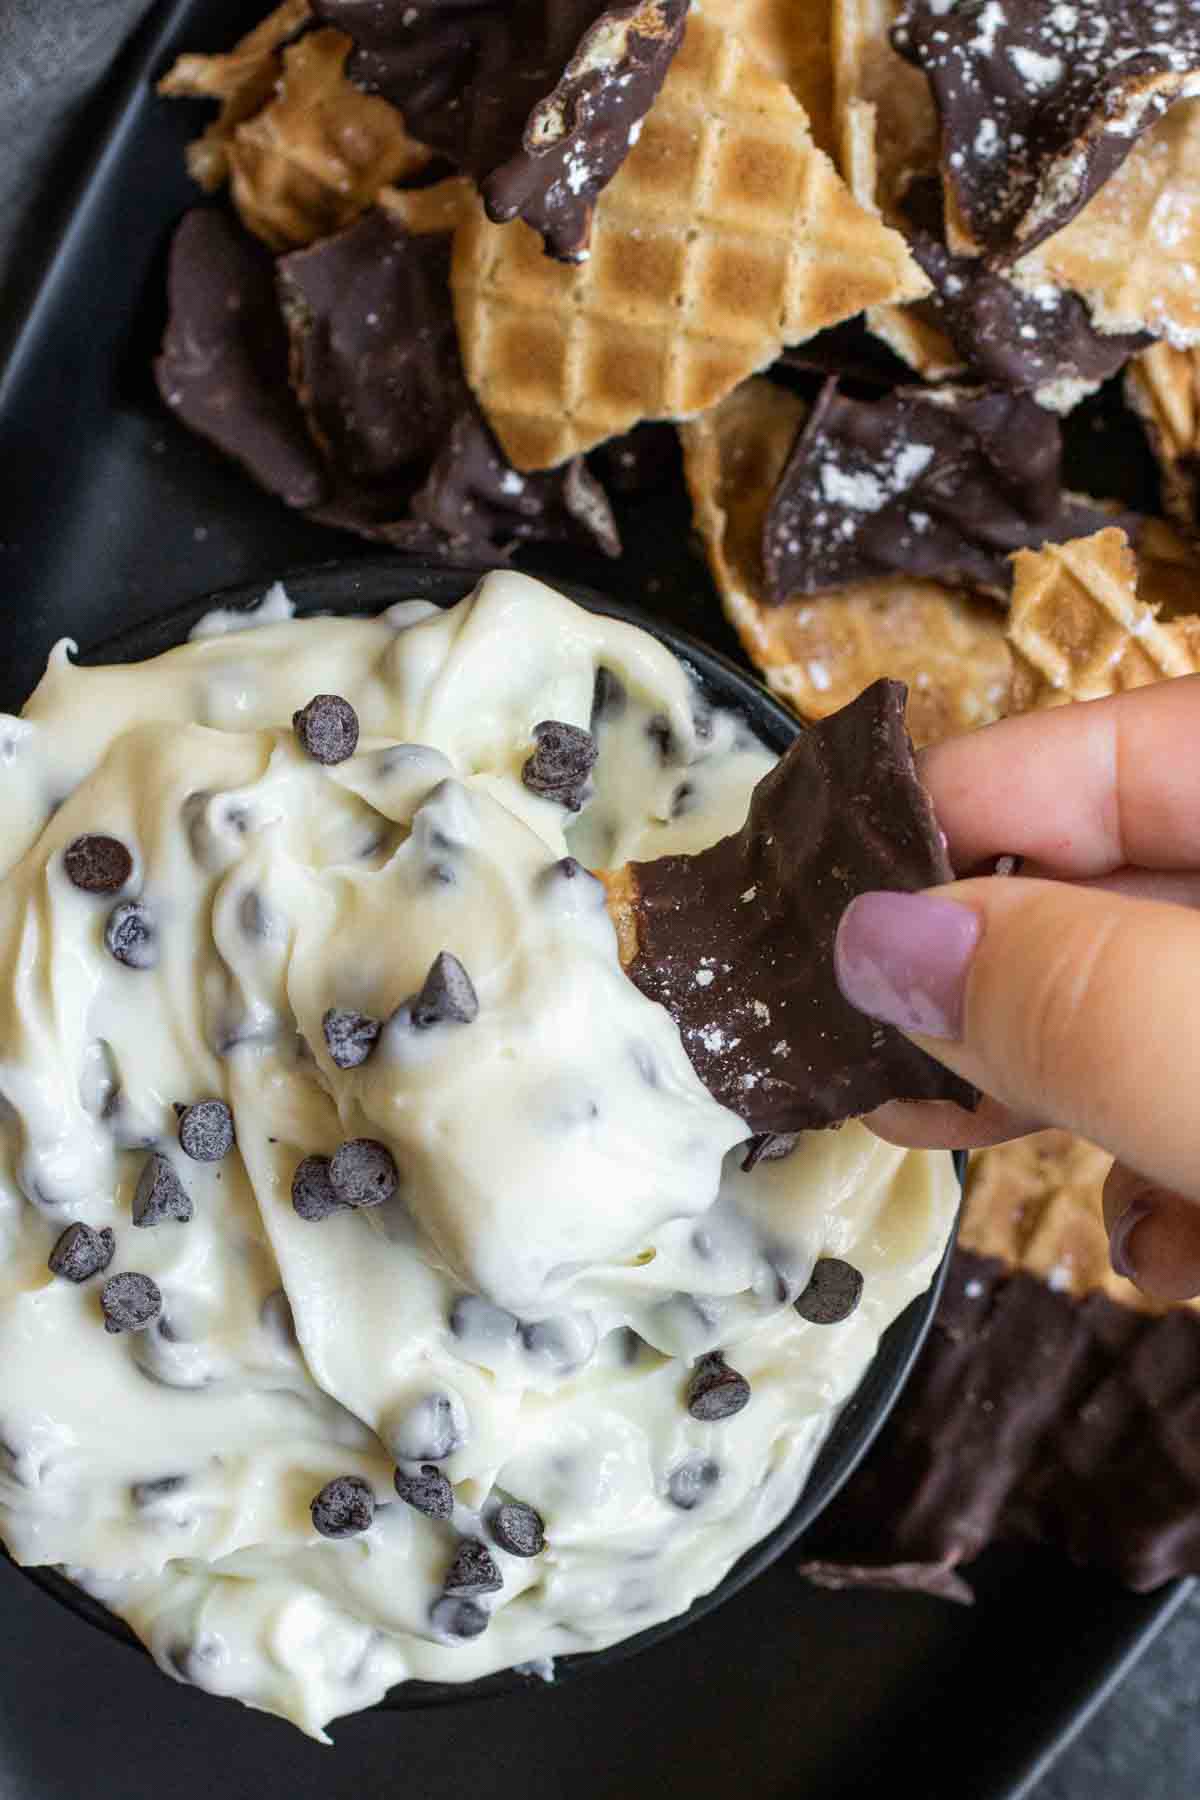 dipping into Cannoli Dip with waffle chip